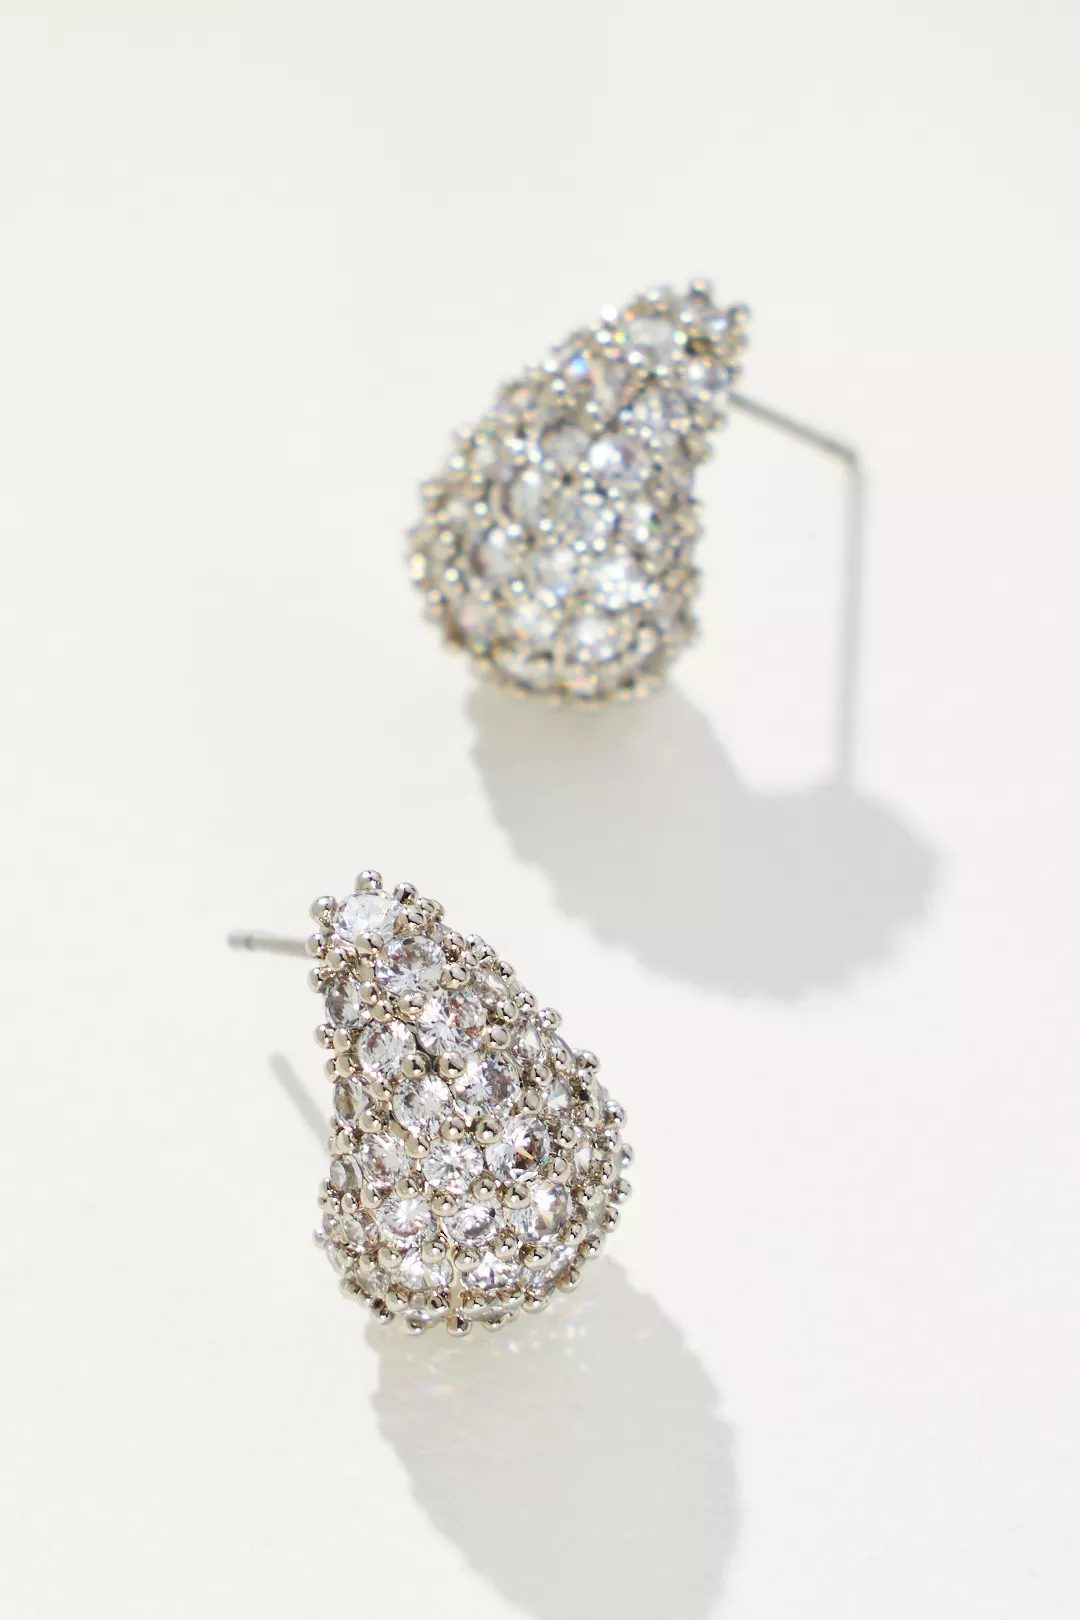 These TikTok-famous earrings have definitive drip (and a go-viral kind of flair). This pavé pair is pure molten-magic – so grab yours before they're gone (again!!).